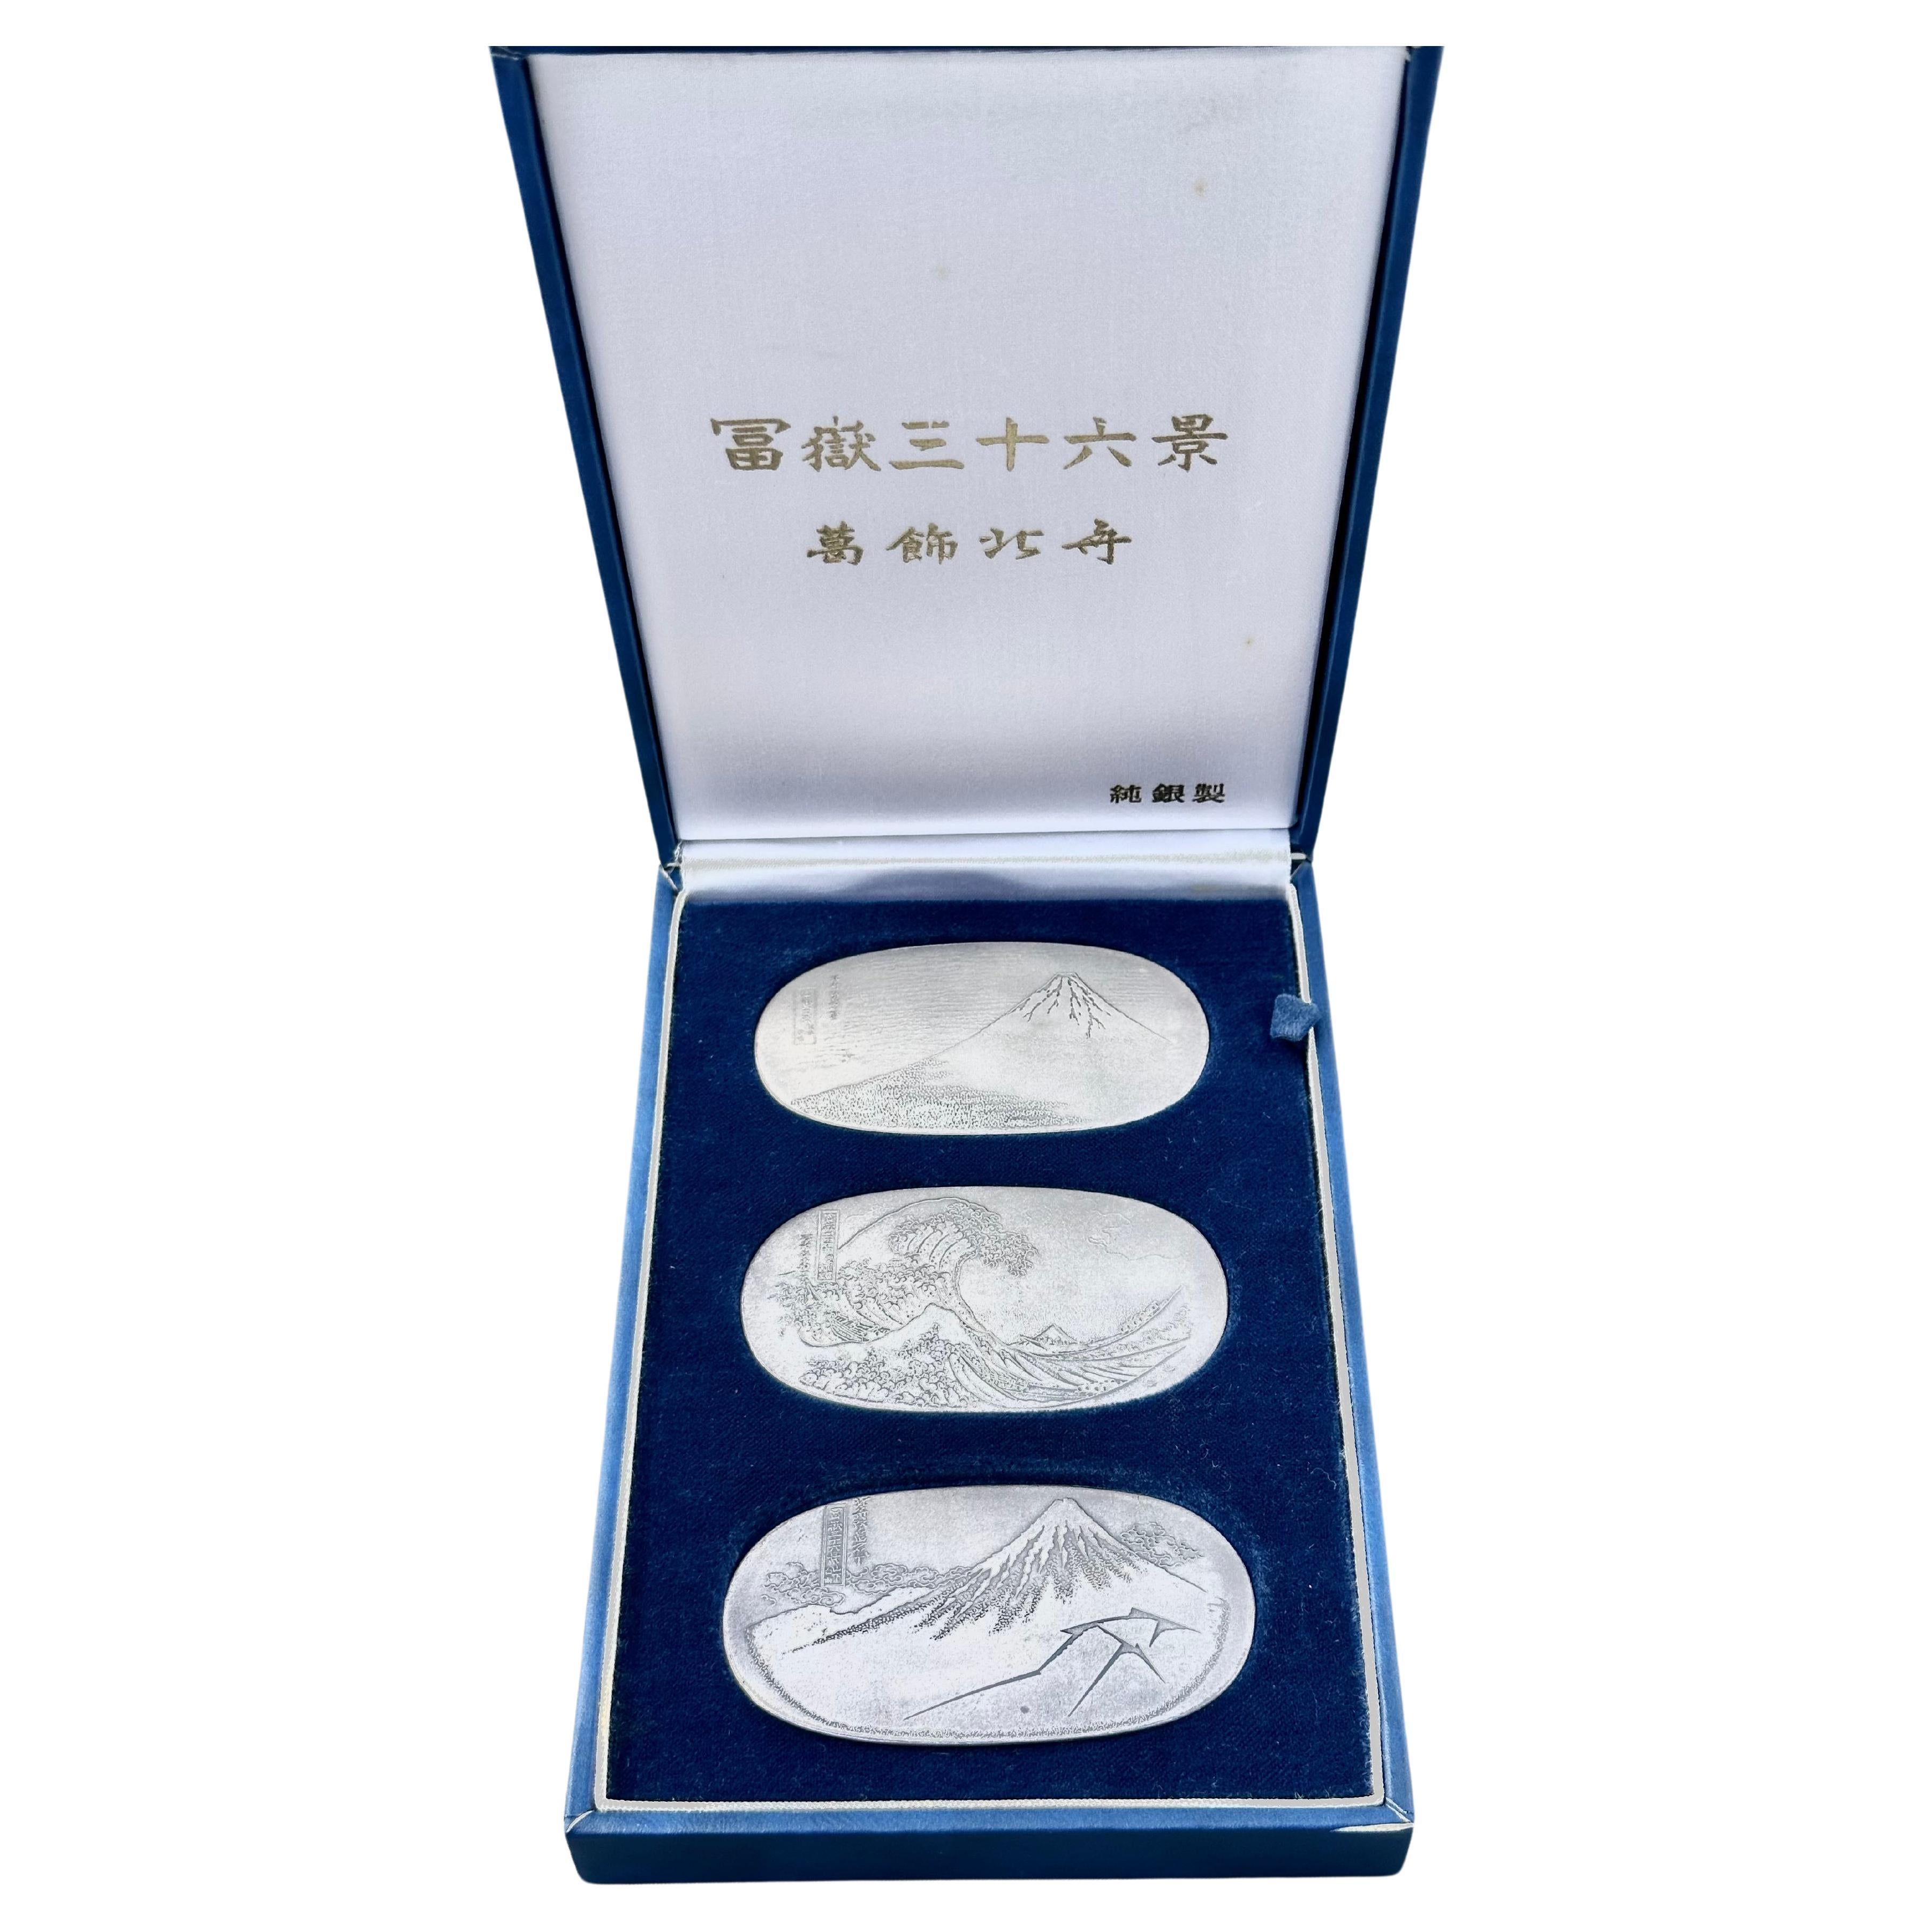  Japanese Collection in box of Three Pure Silver Kobans of "Katsushika Hokusai"  For Sale